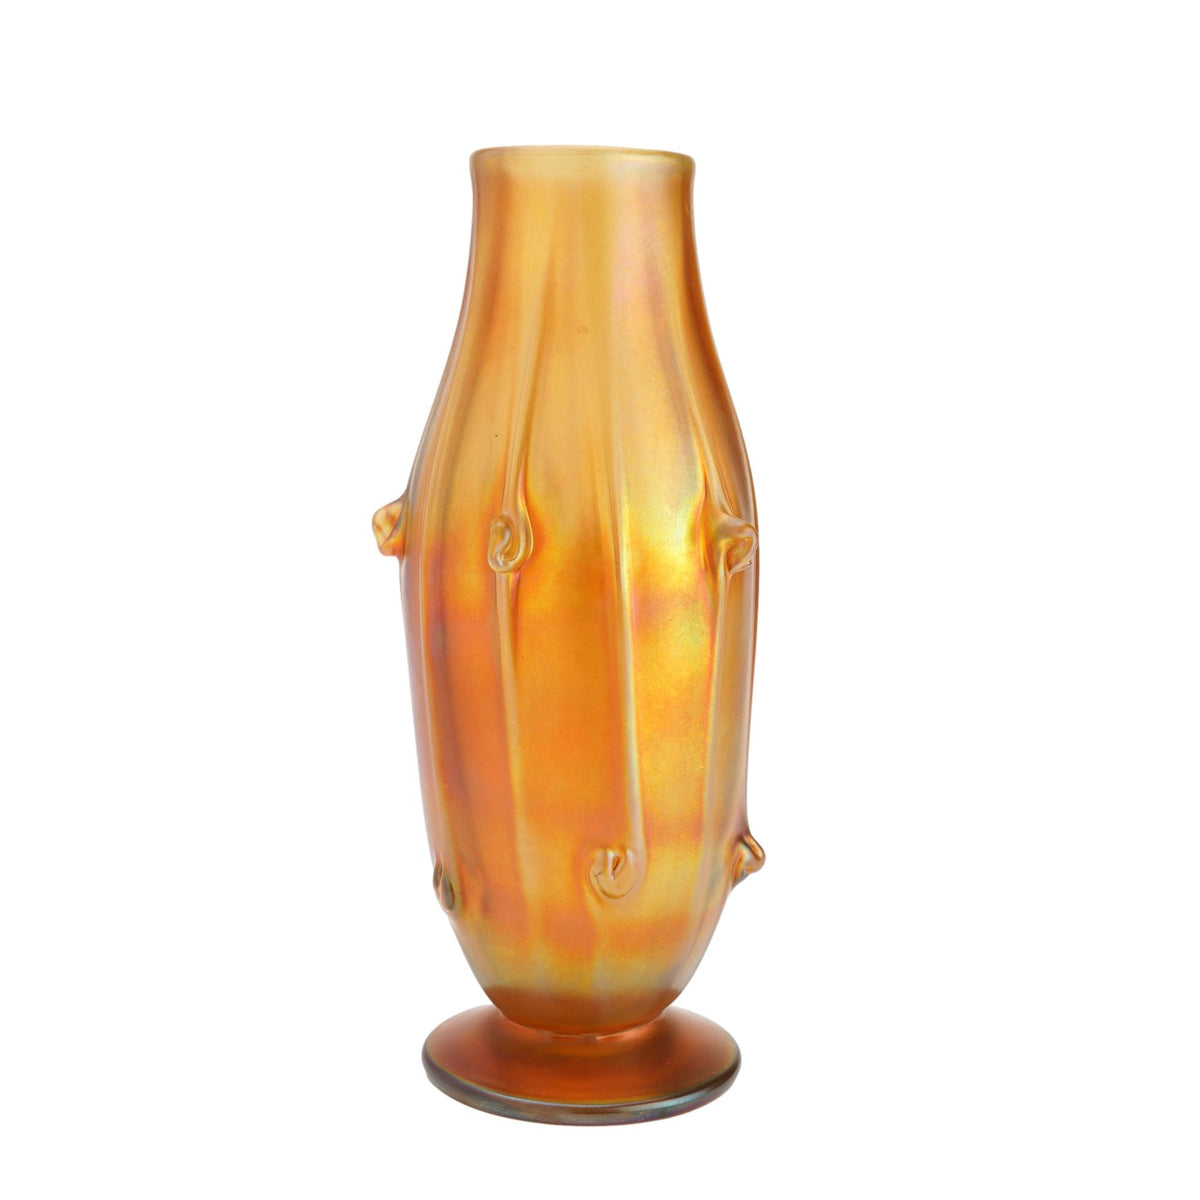 Vase, c.1900 (favrile glass) by Louis Comfort Tiffany